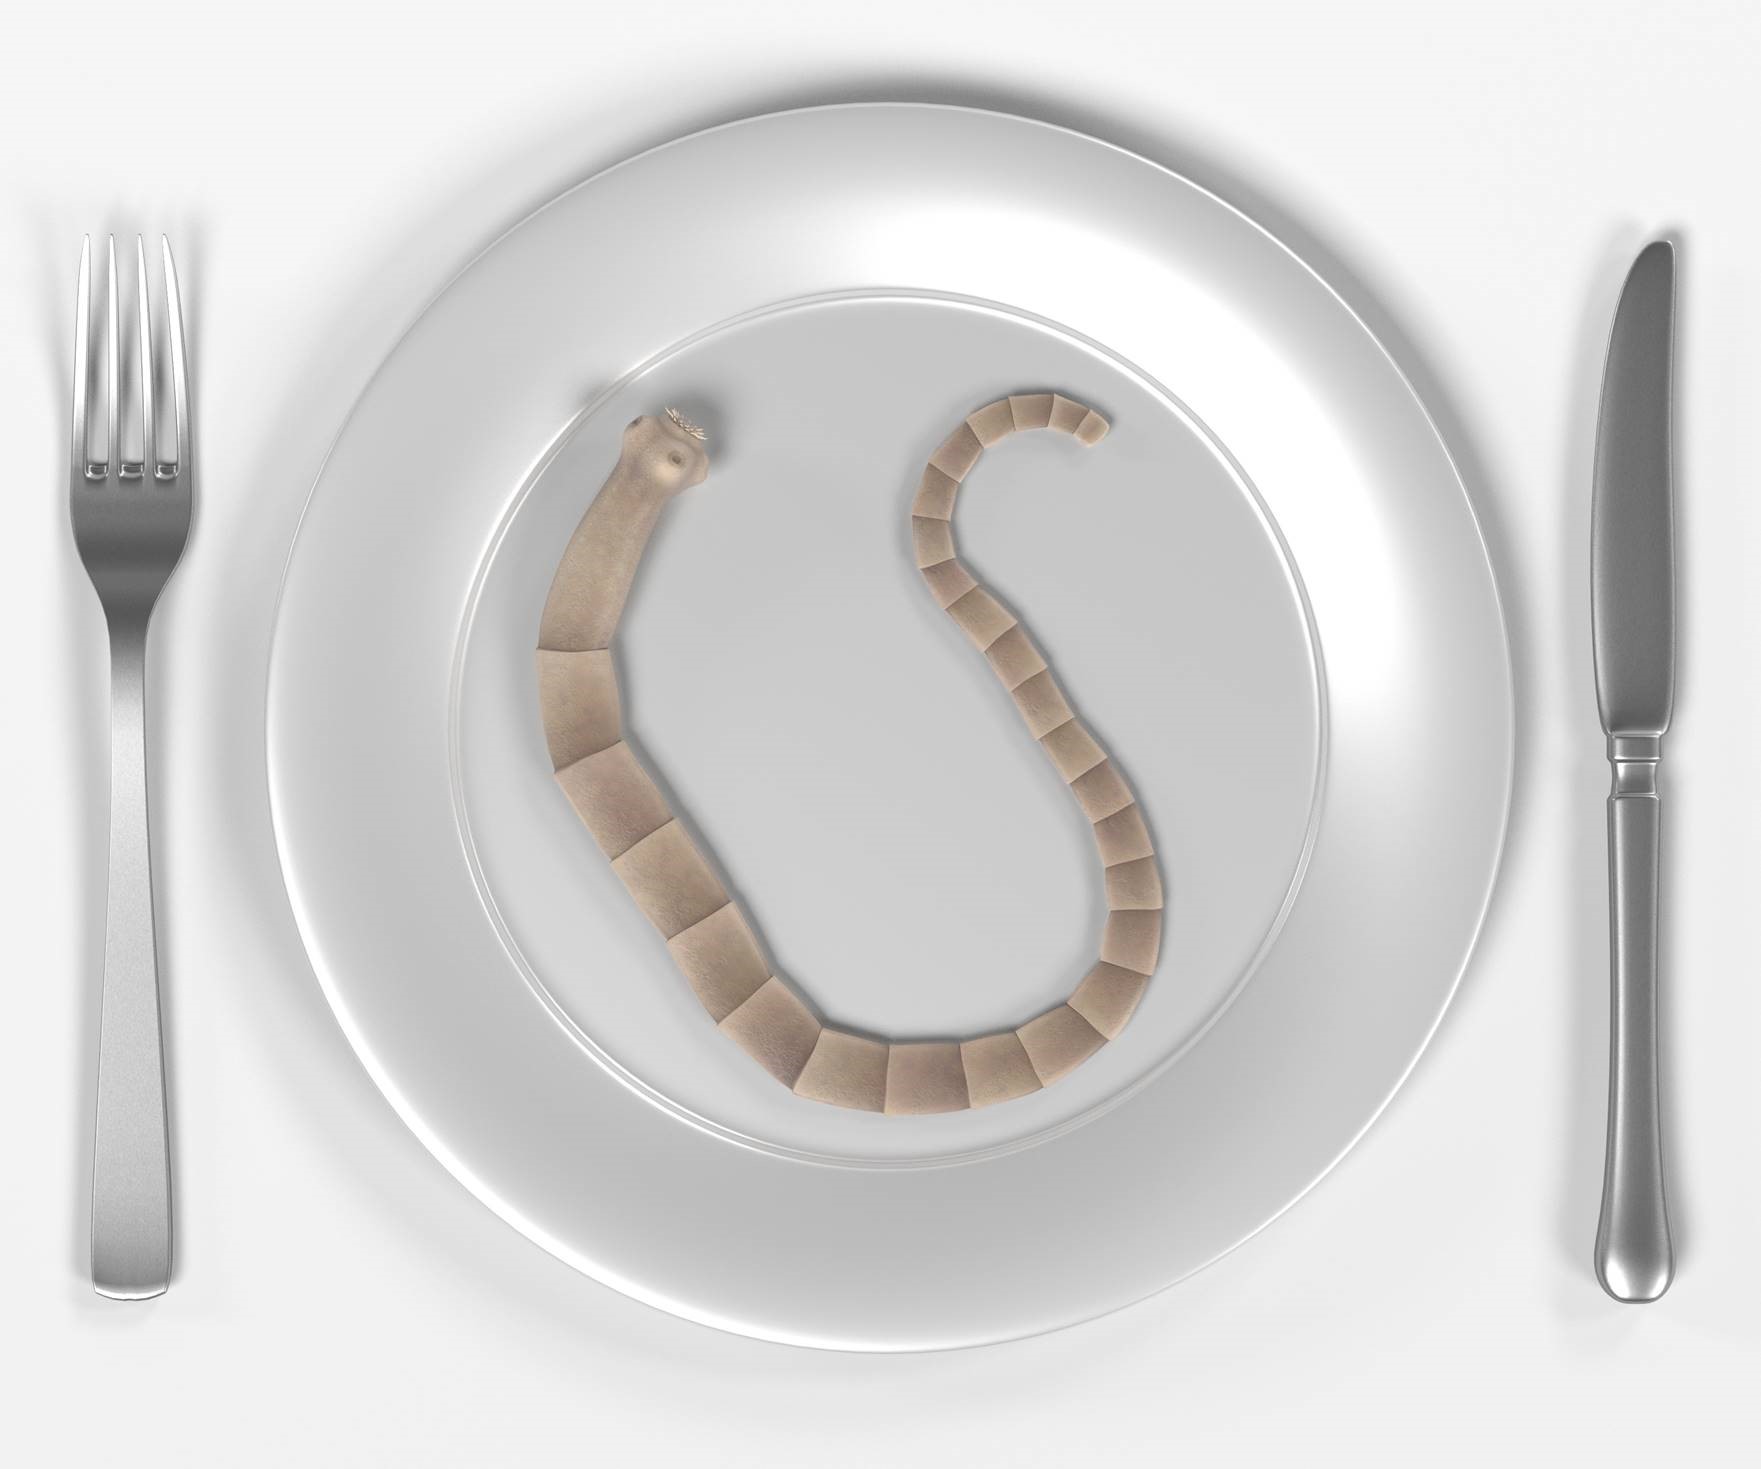 tapeworm on a plate